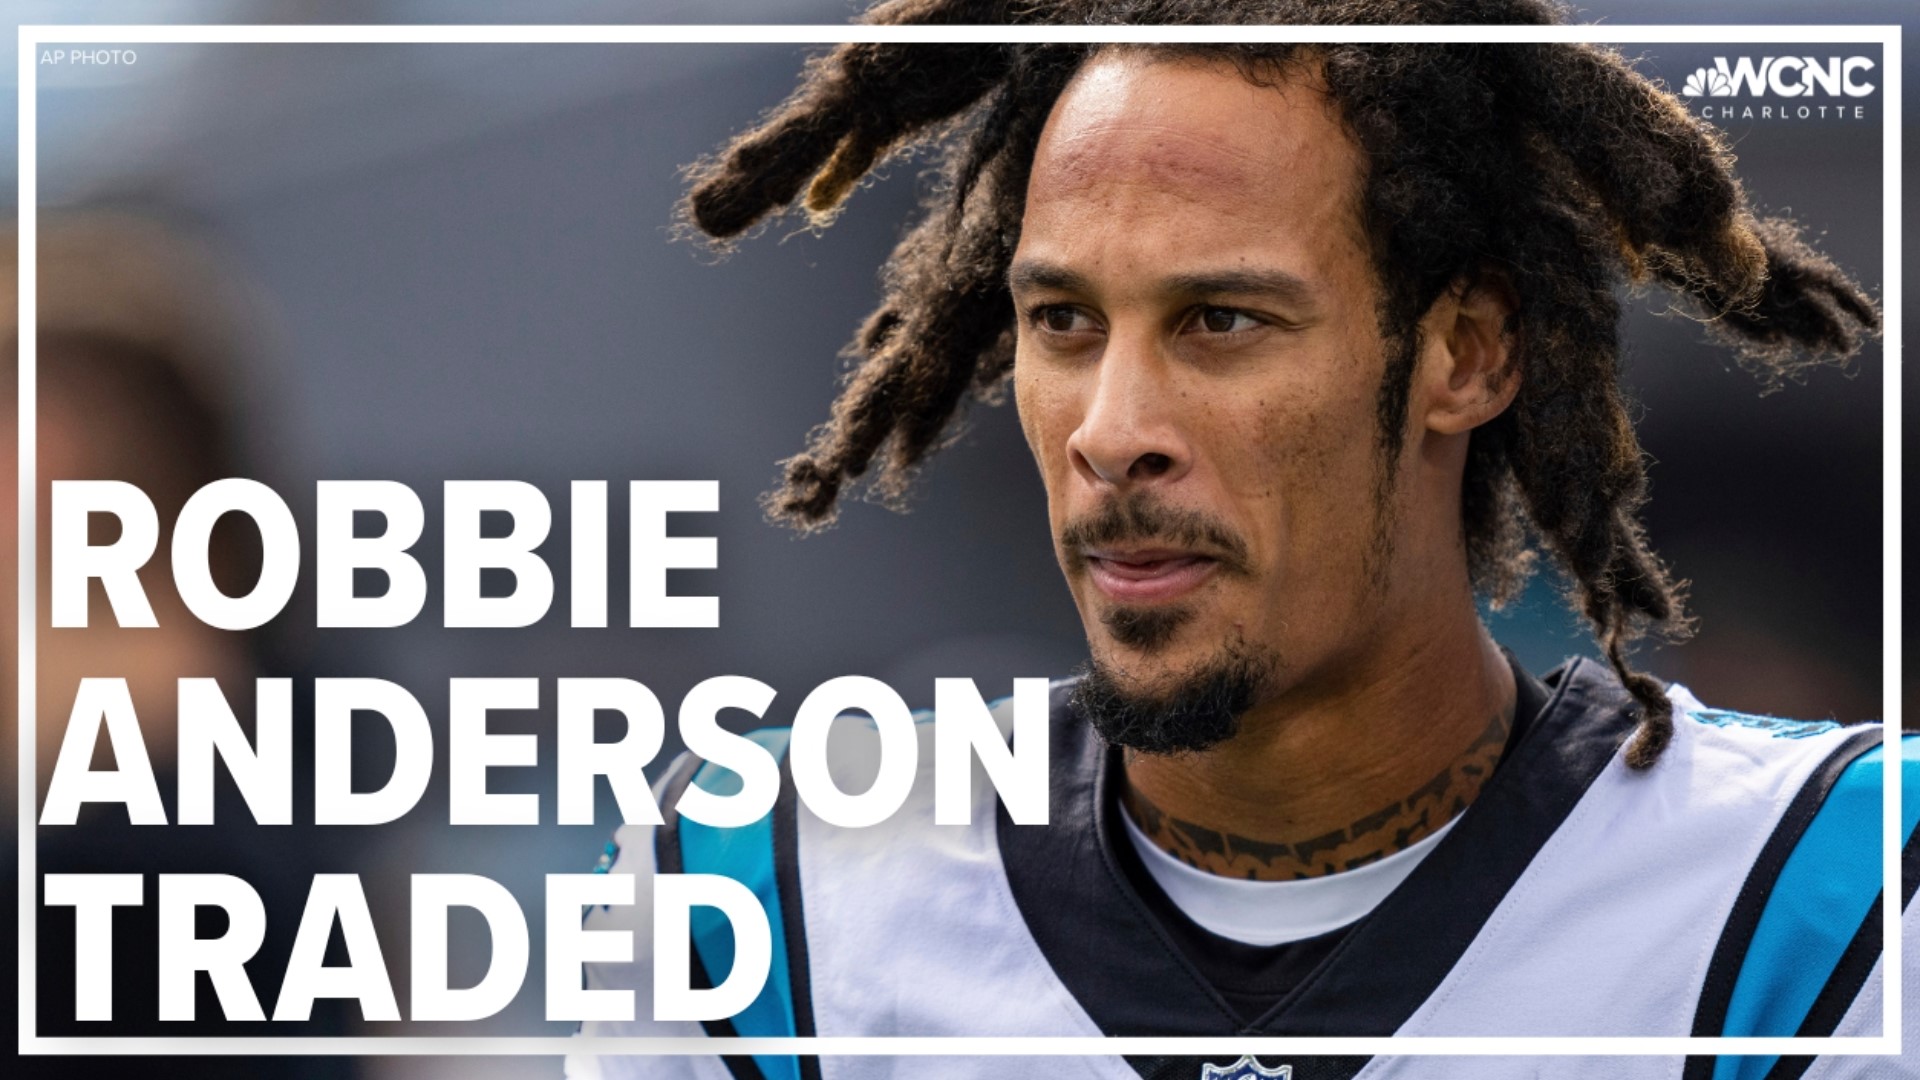 Anderson was sent to the locker room by interim coach Steve Wilks following a heated argument with wide receiver coach Joe Dailey.